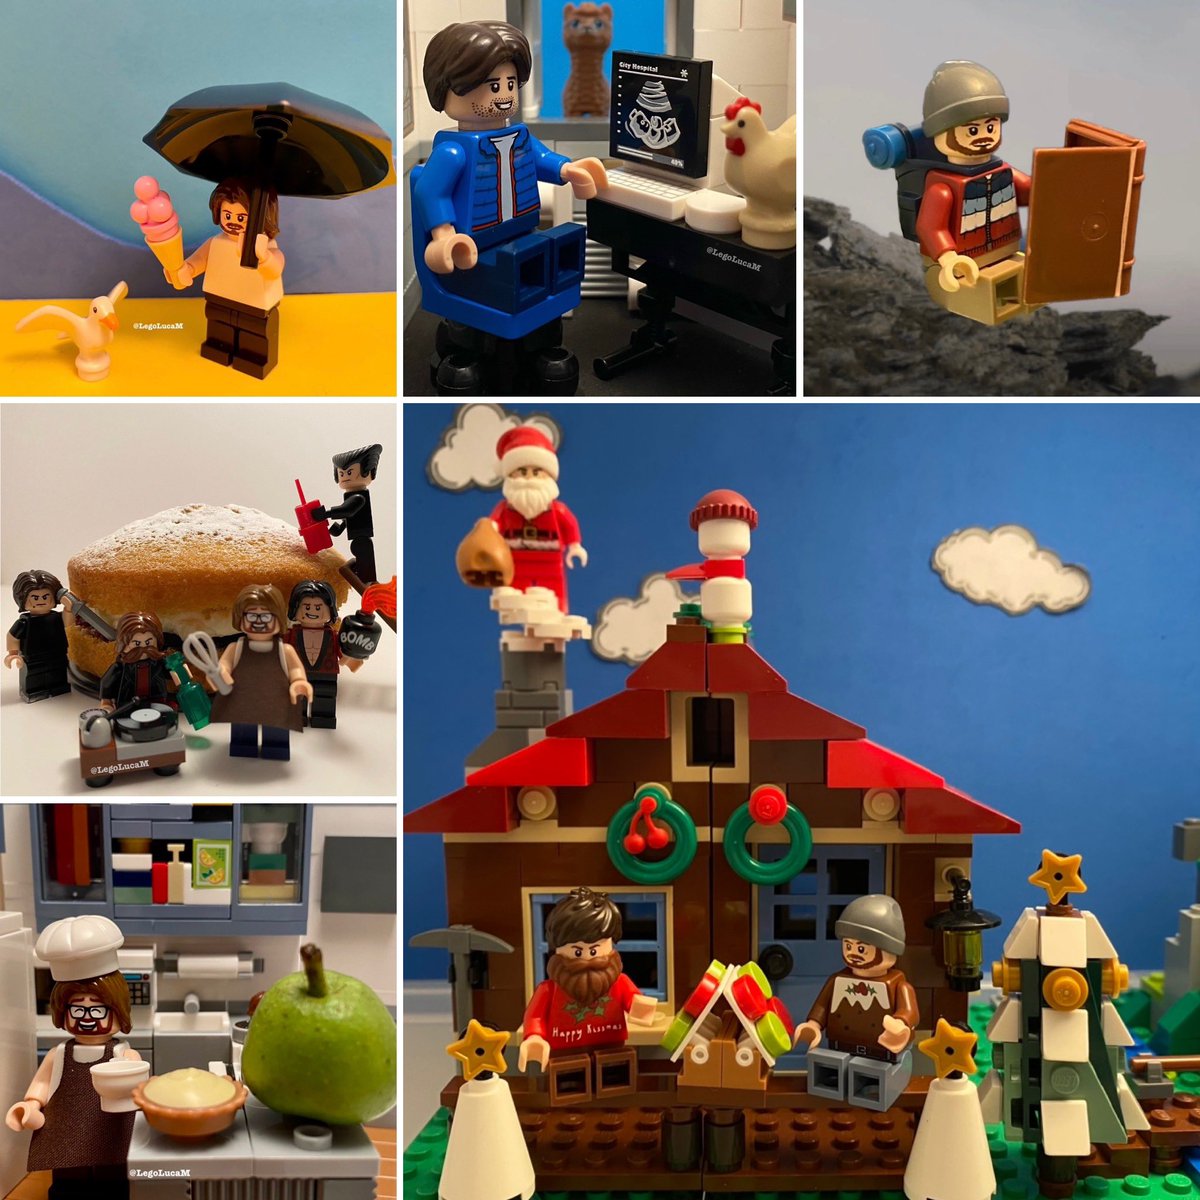 It’s a wrap- here are 12 images from the last 12 months. Thank you all for your support- here’s to the next 12 months! 

#LucaMarinelli #Lego #Legography #ArtWrap2022